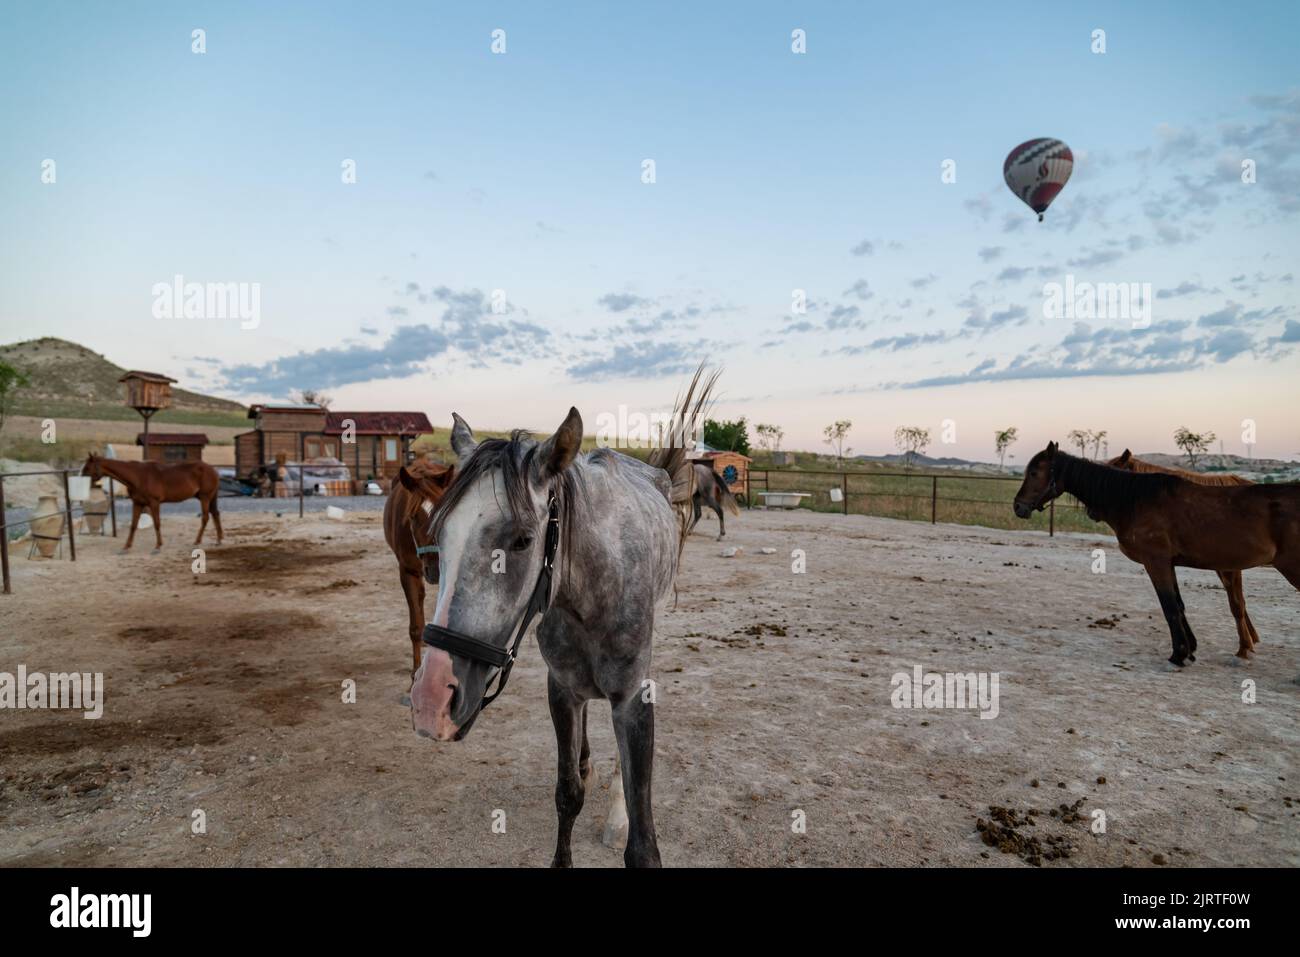 Horses on the sunrise with floating balloons on the background in Goreme, Turkey Stock Photo